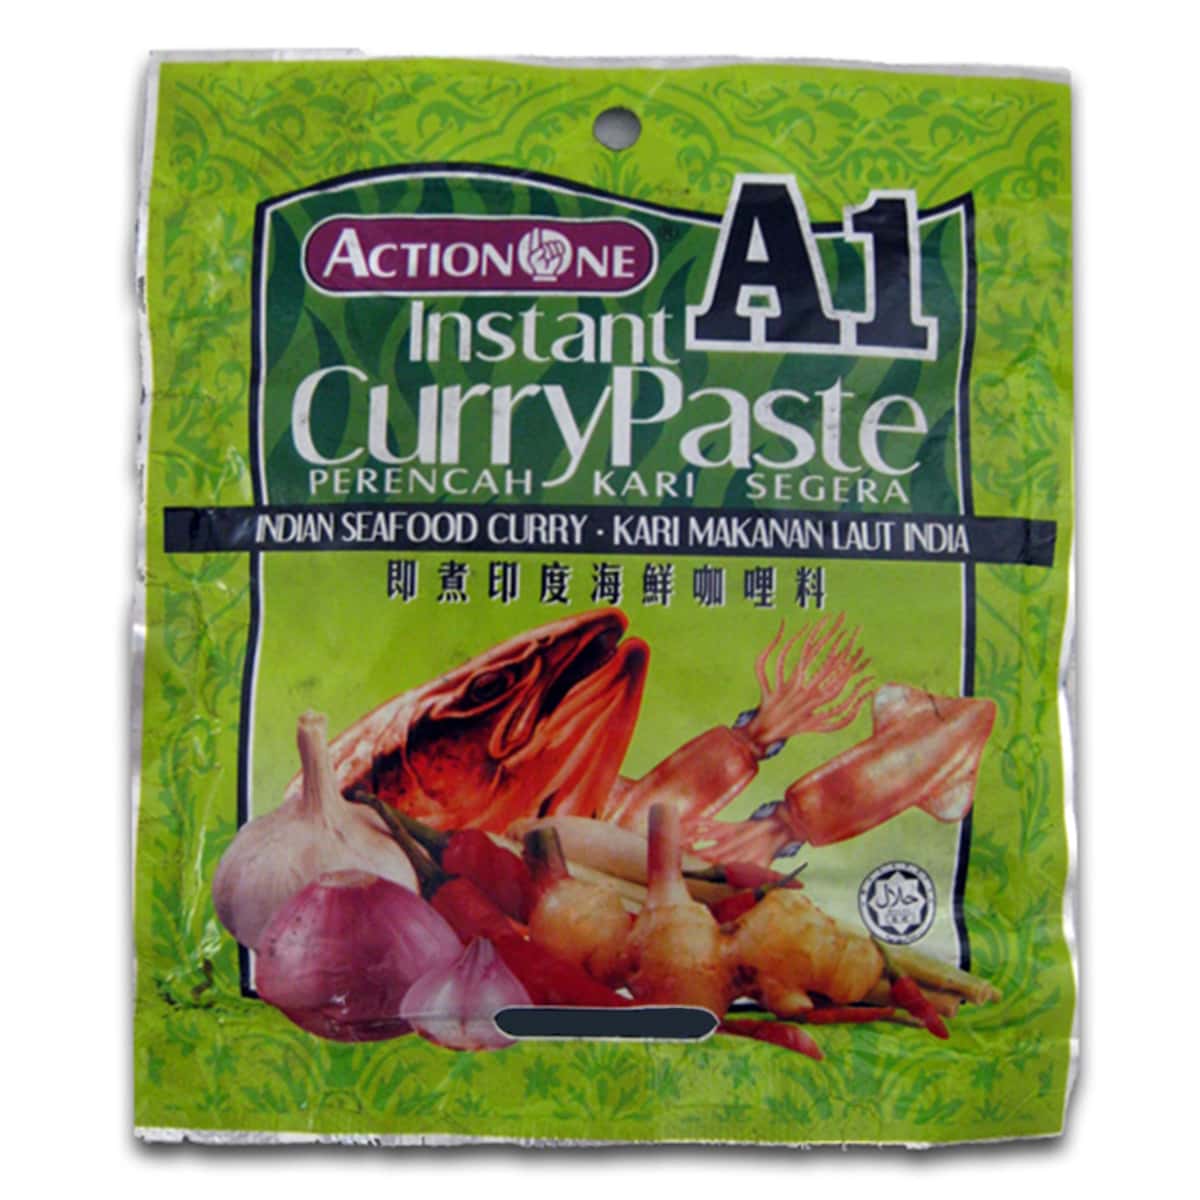 Buy Action One (A1) Instant Curry Paste (Indian Seafood Curry) - 230 gm